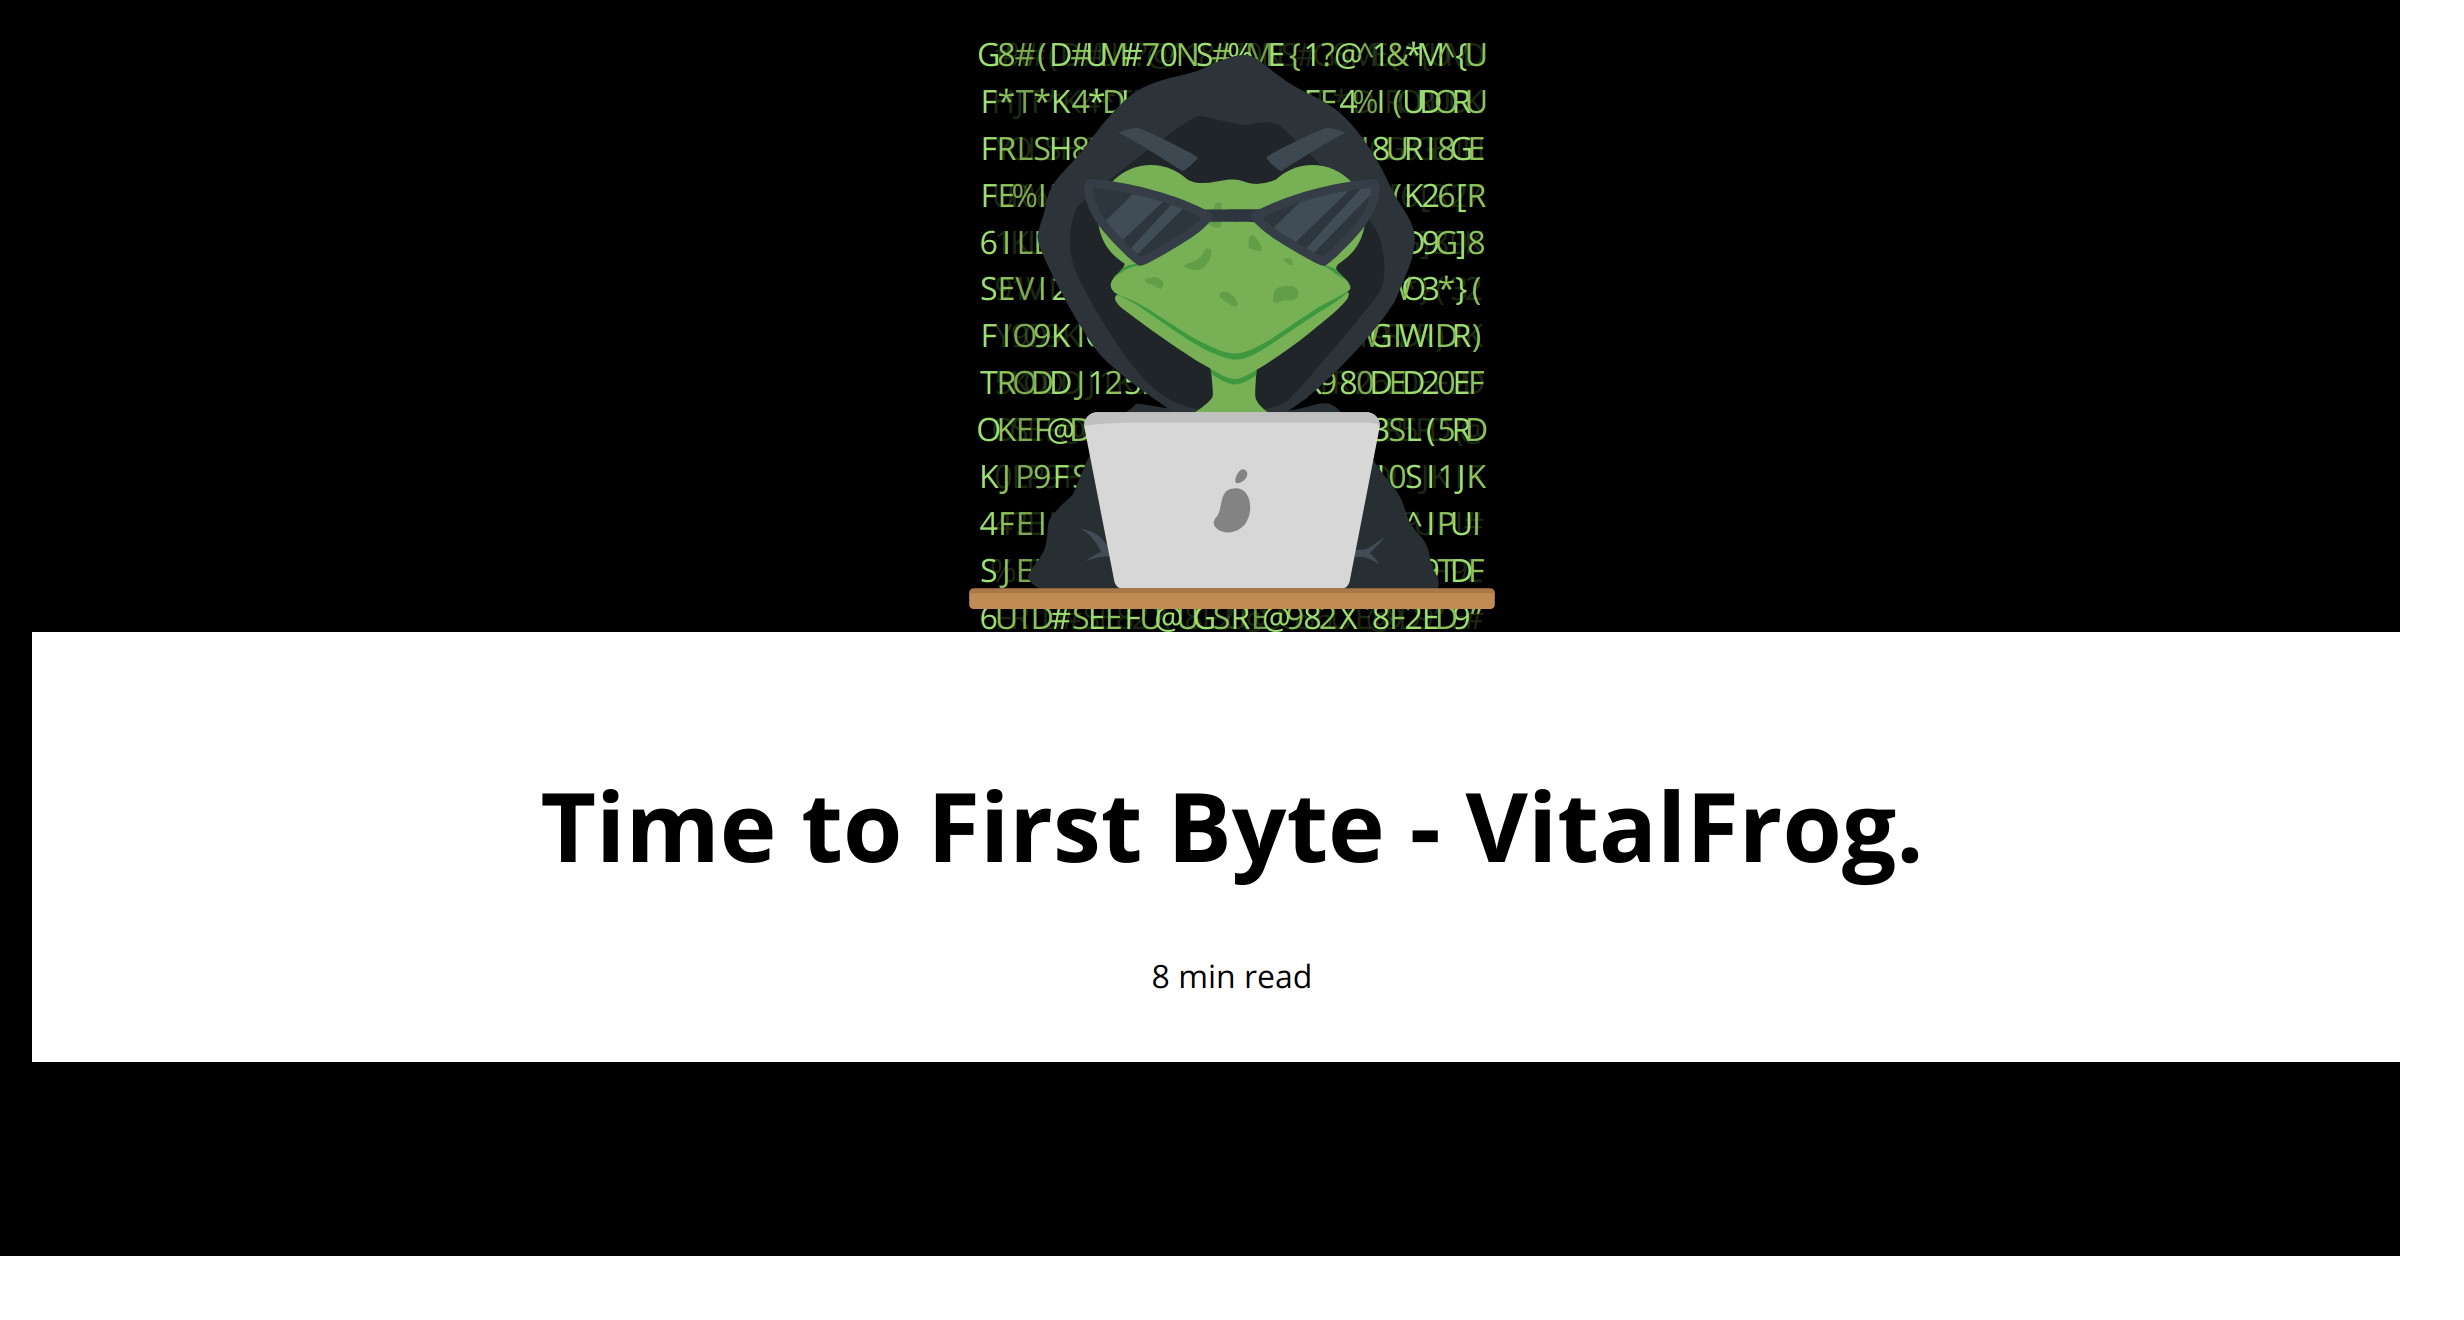 Time To First Byte - VitalFrog.